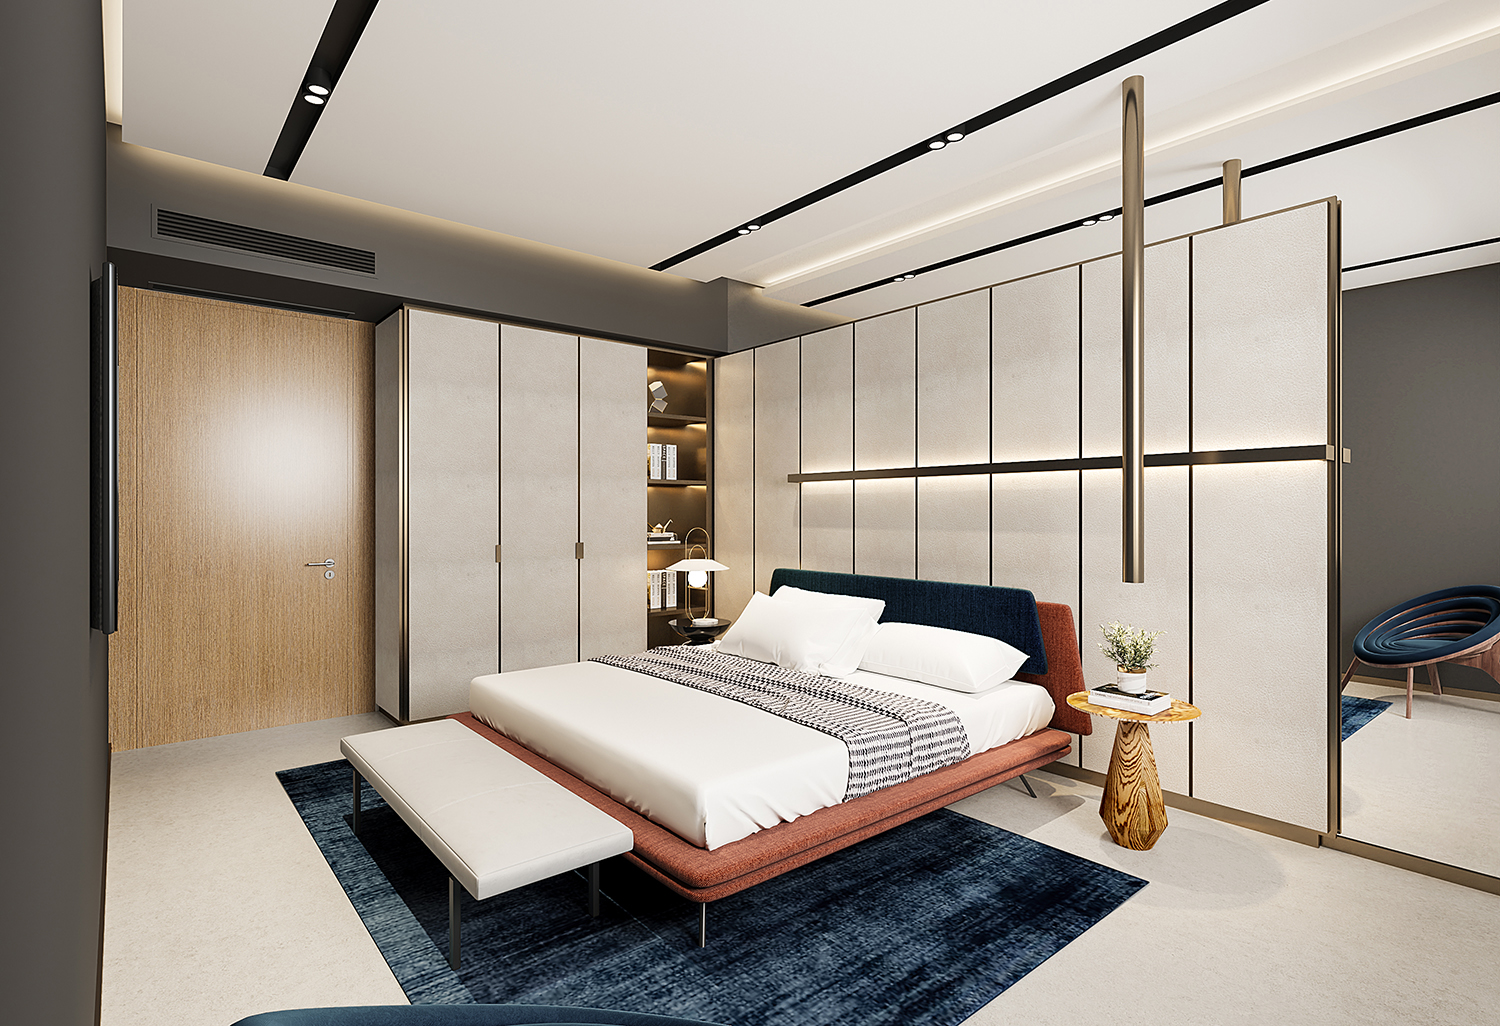 Christine Tsui and Ryan Cheung - CTRC Design Consultant Ltd. - Qin Palace_Duplex